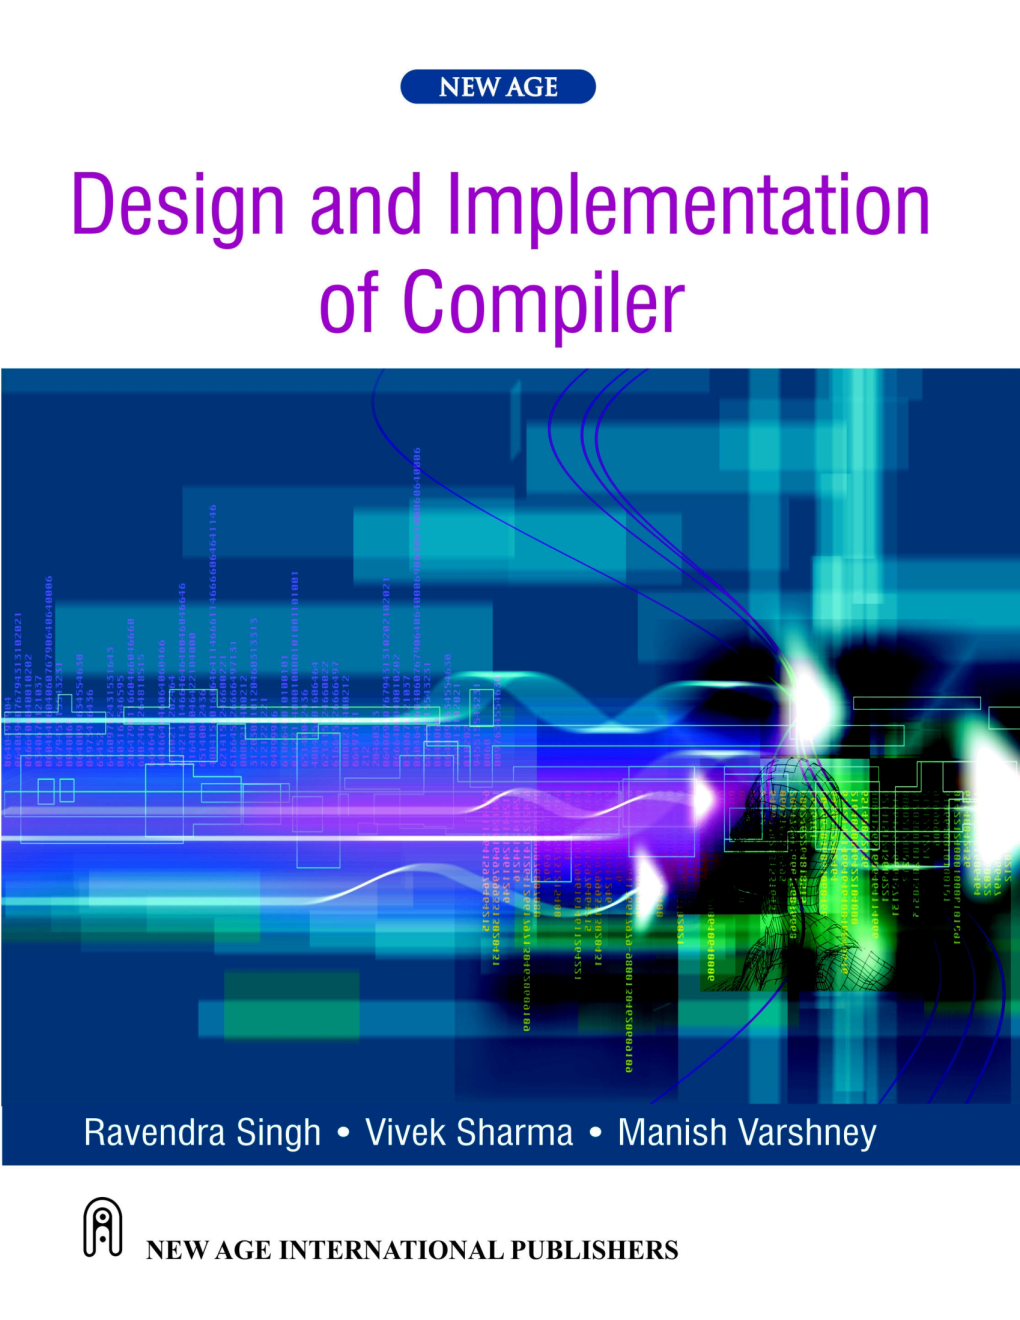 Design and Implementation of Compiler